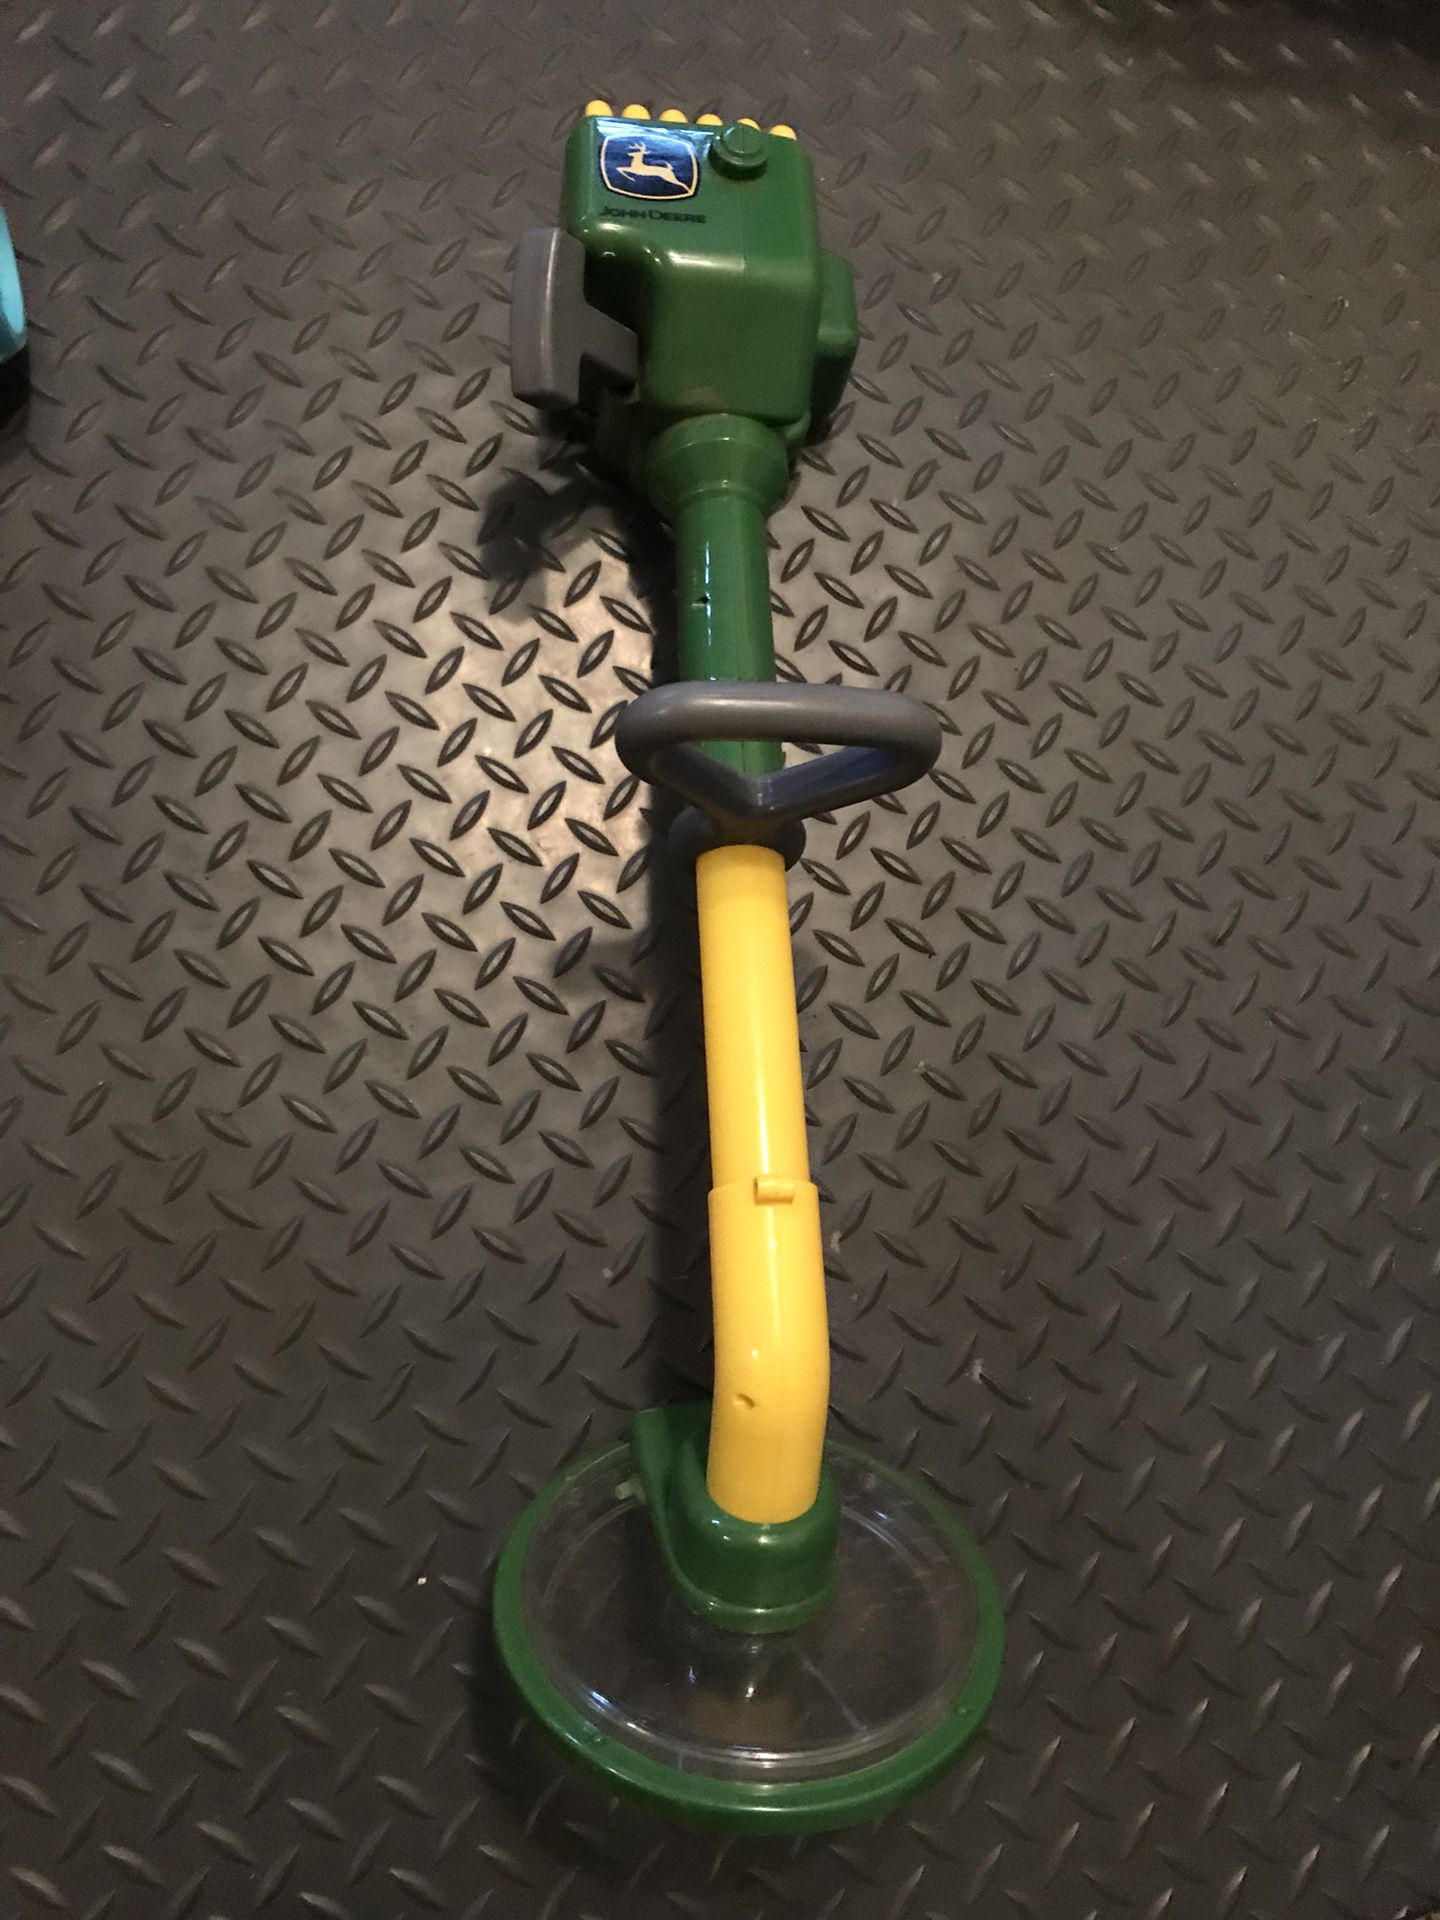 Kids pretend gardener or landscaper blower and trimmer toy $8 each or $15 or $20 all 3 together